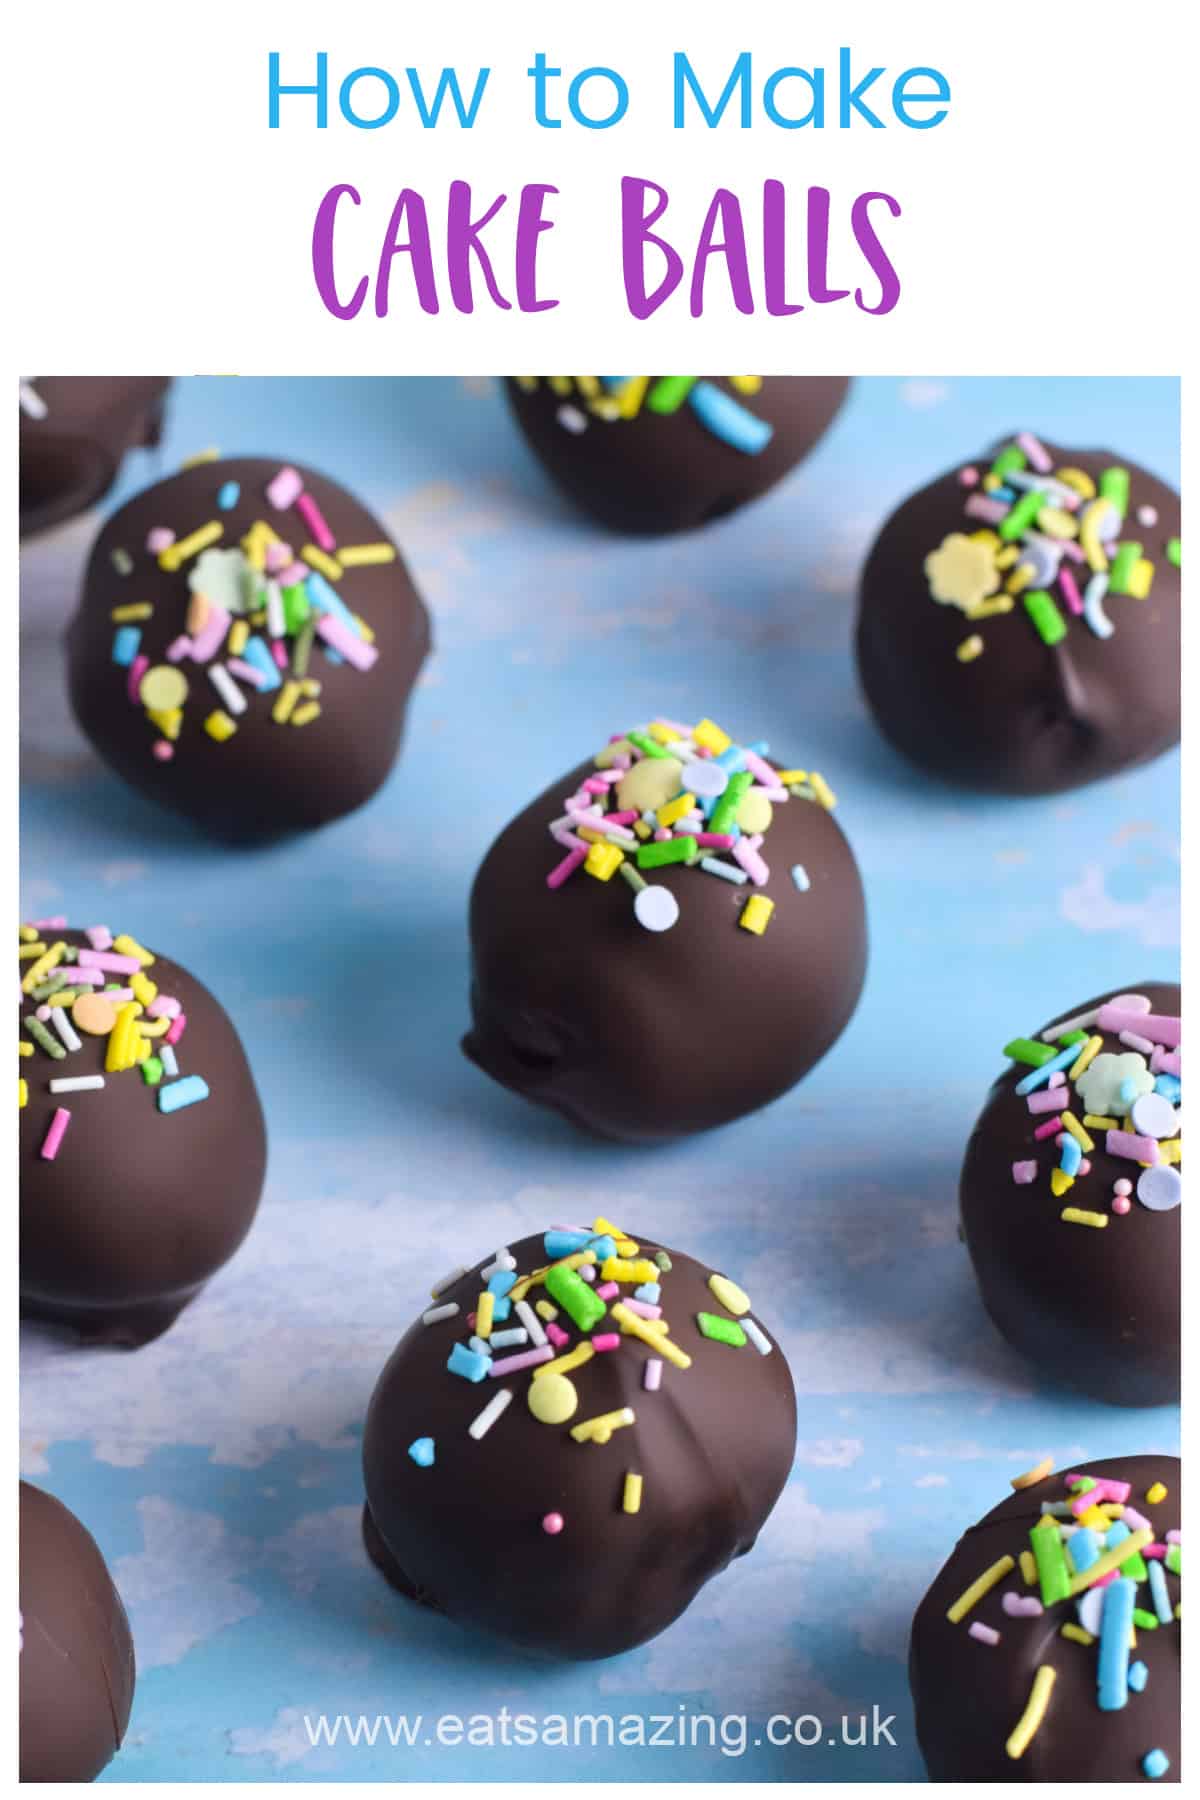 Super easy recipe for chocolate covered cake balls - great for using up leftover cake cut-offs and cupcakes